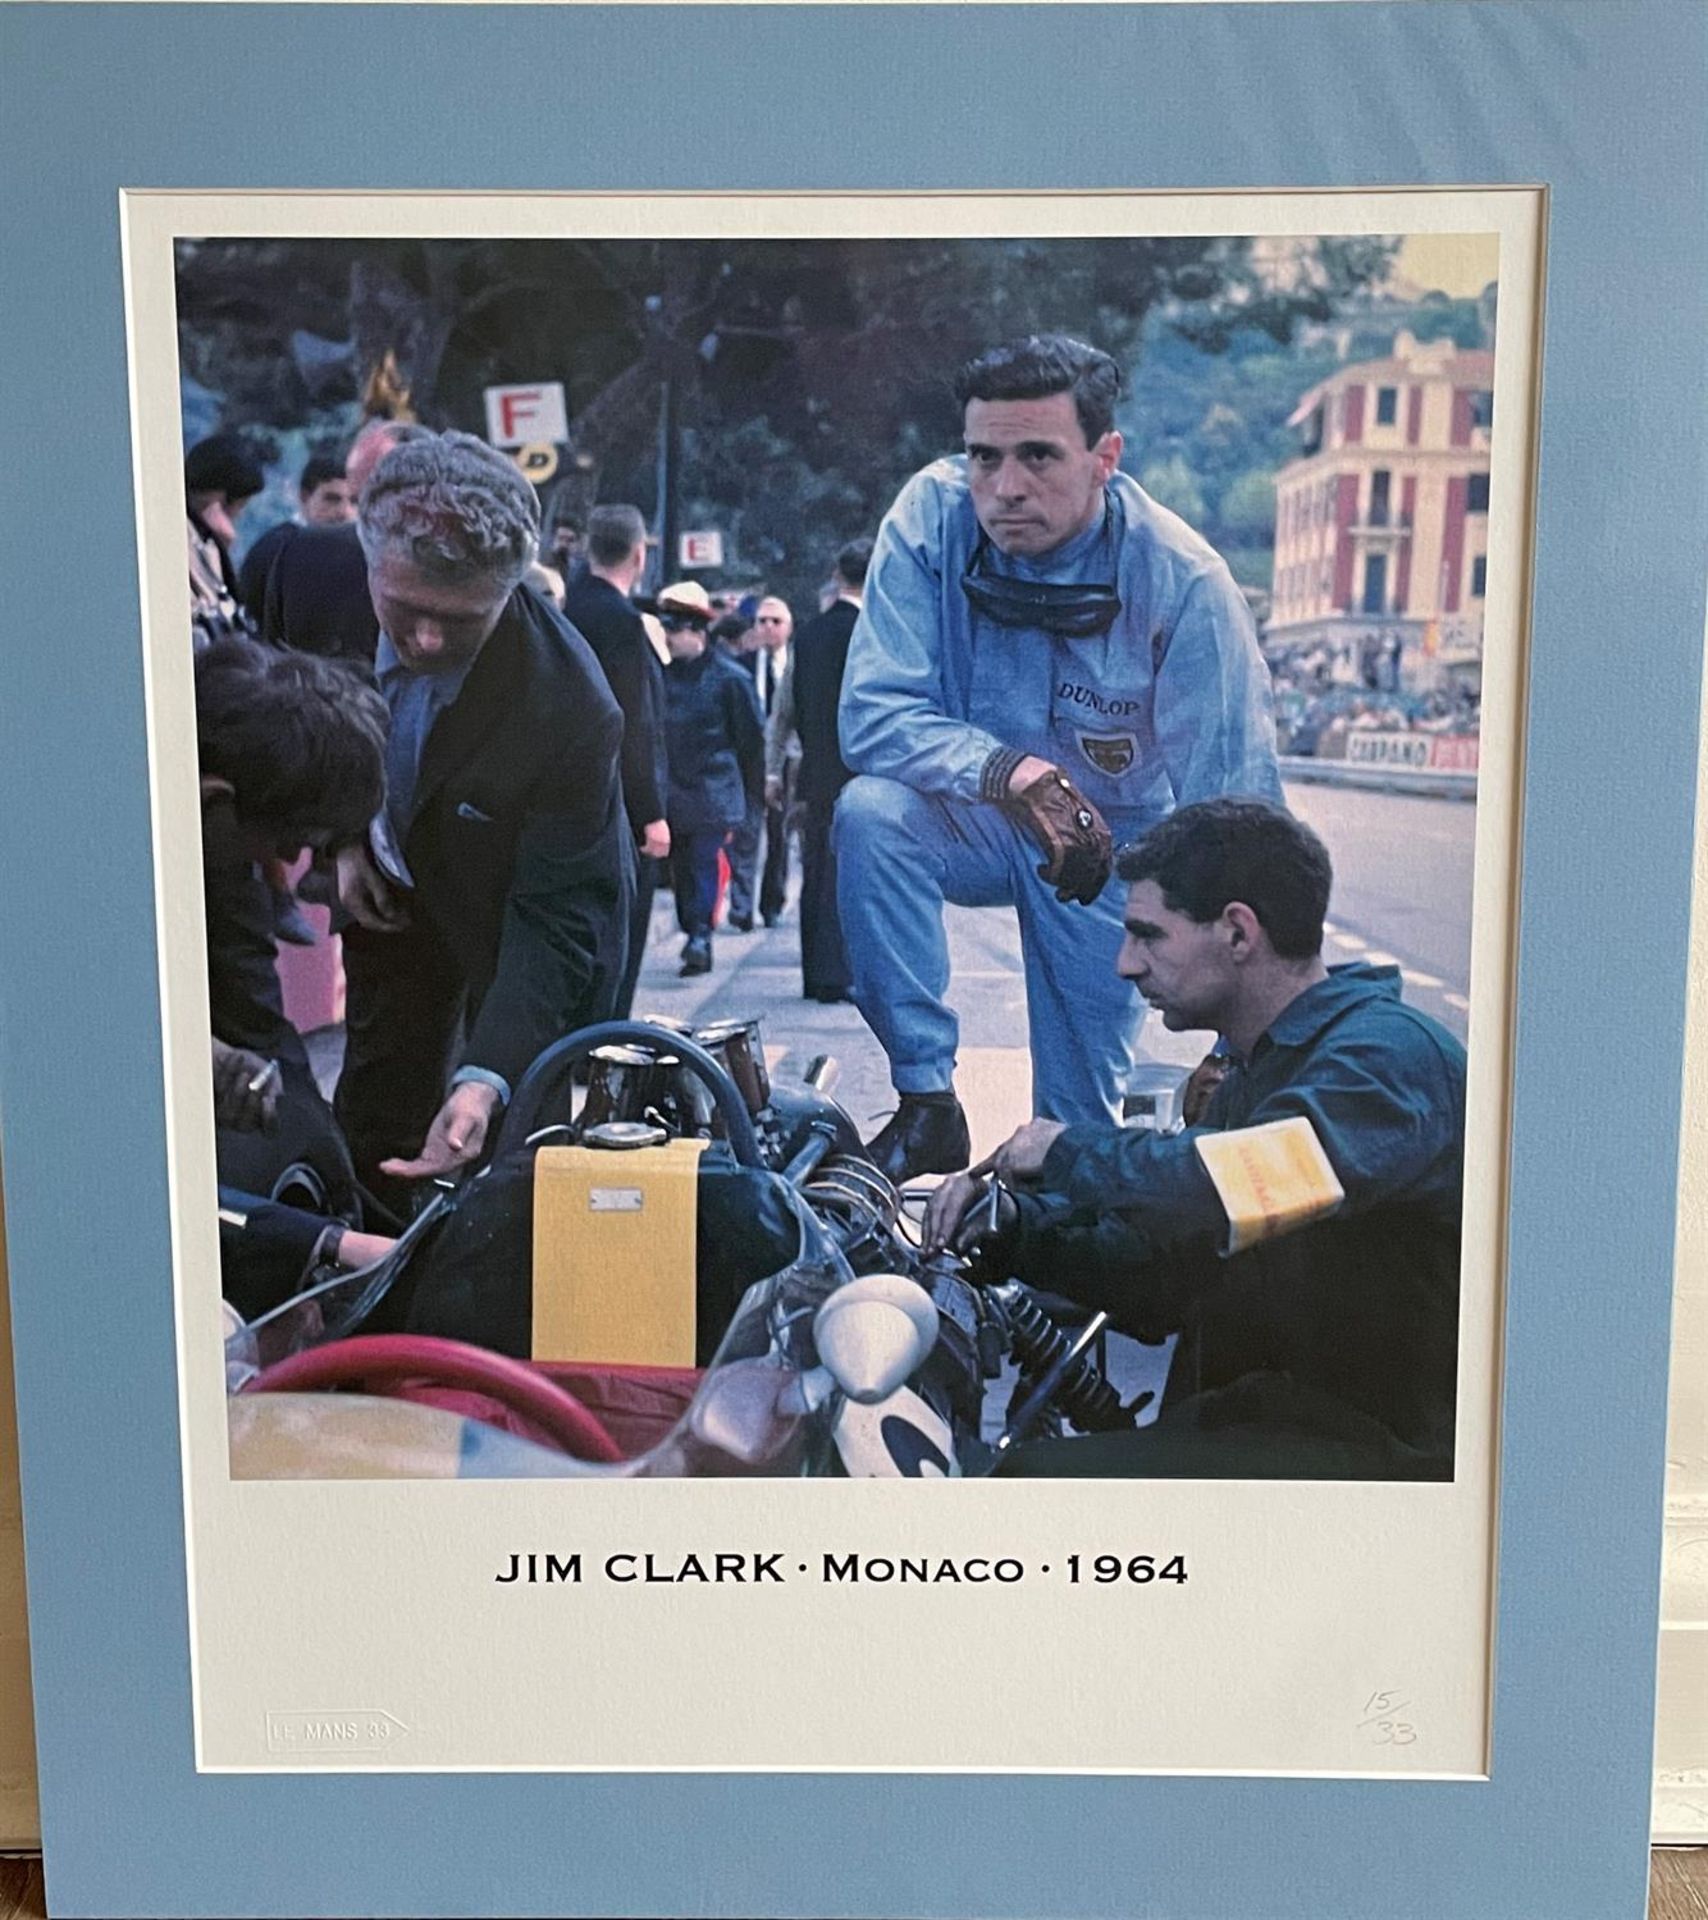 Jim Clark's 1964 Lotus-Climax Framed Photo - Image 2 of 3